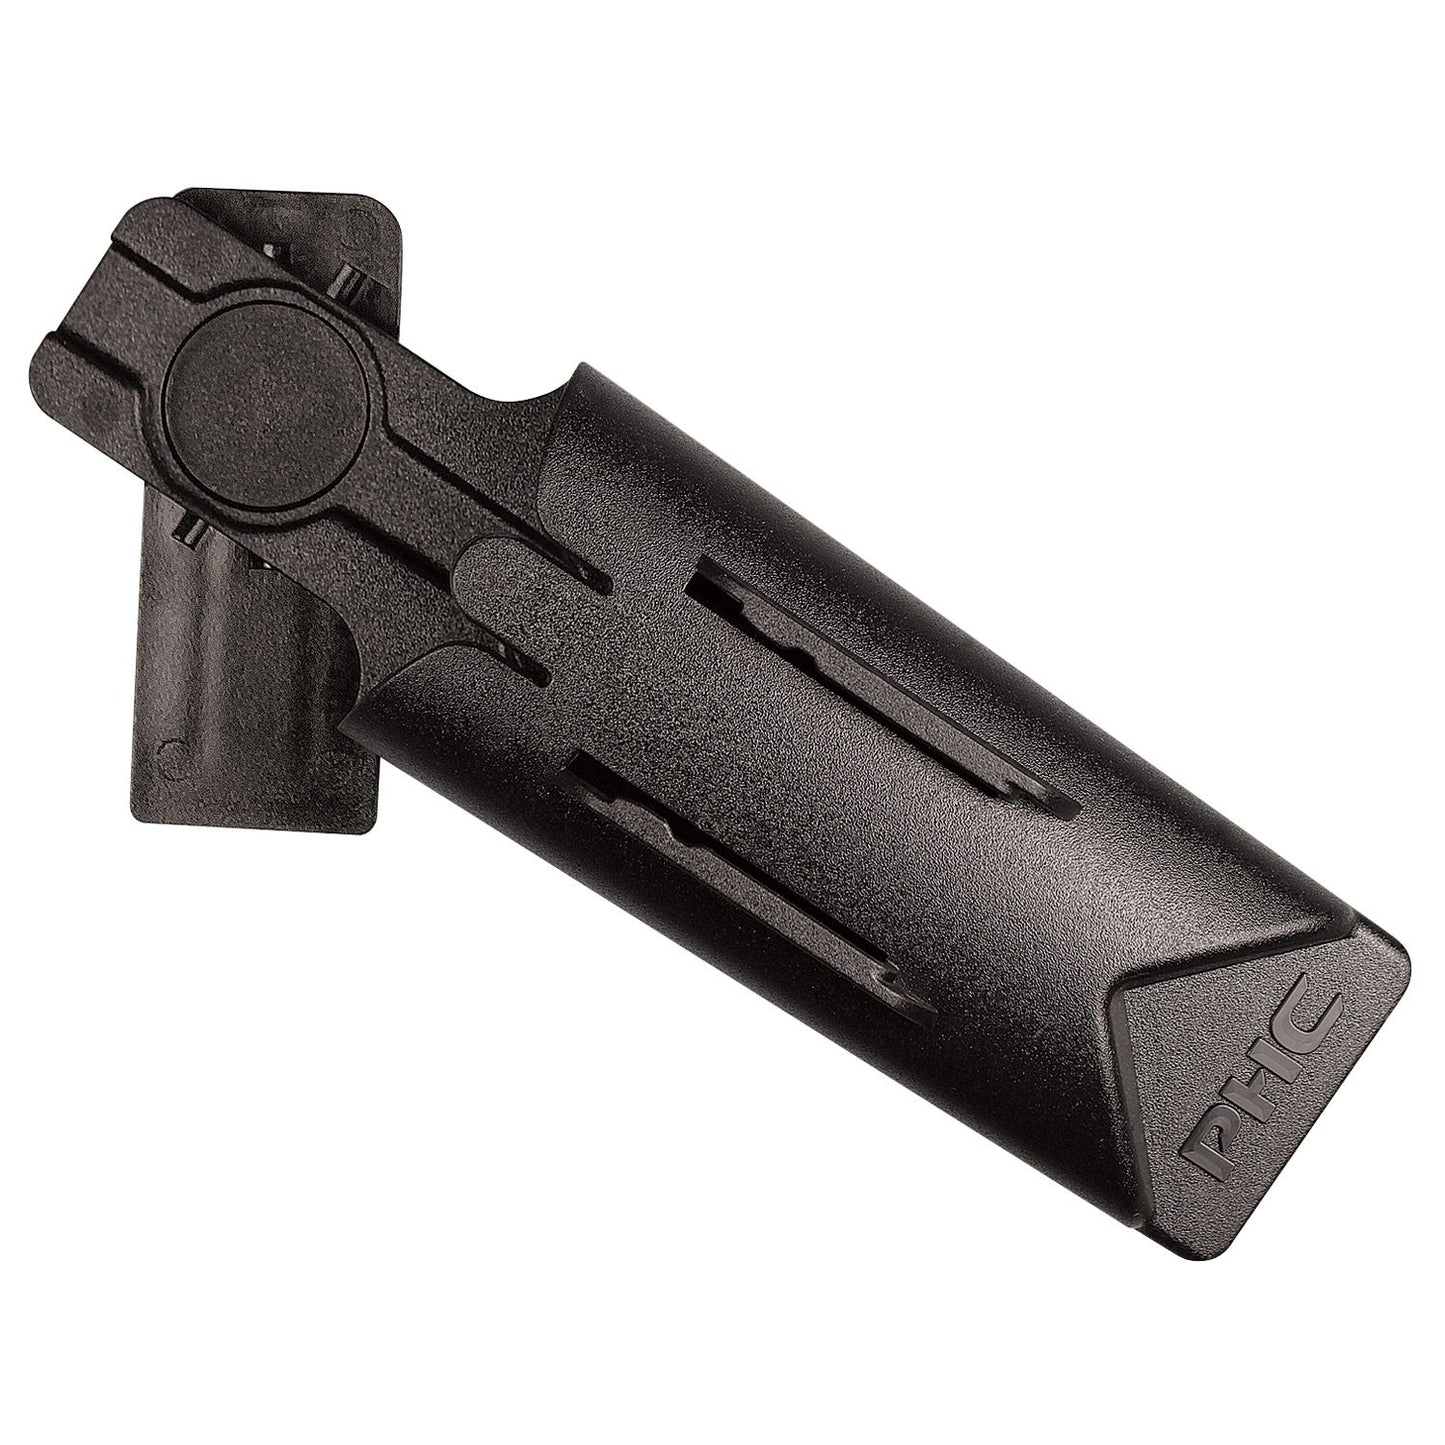 PHC Plastic Swivel Holster For S4, S4S and S5 - DaltonSafety